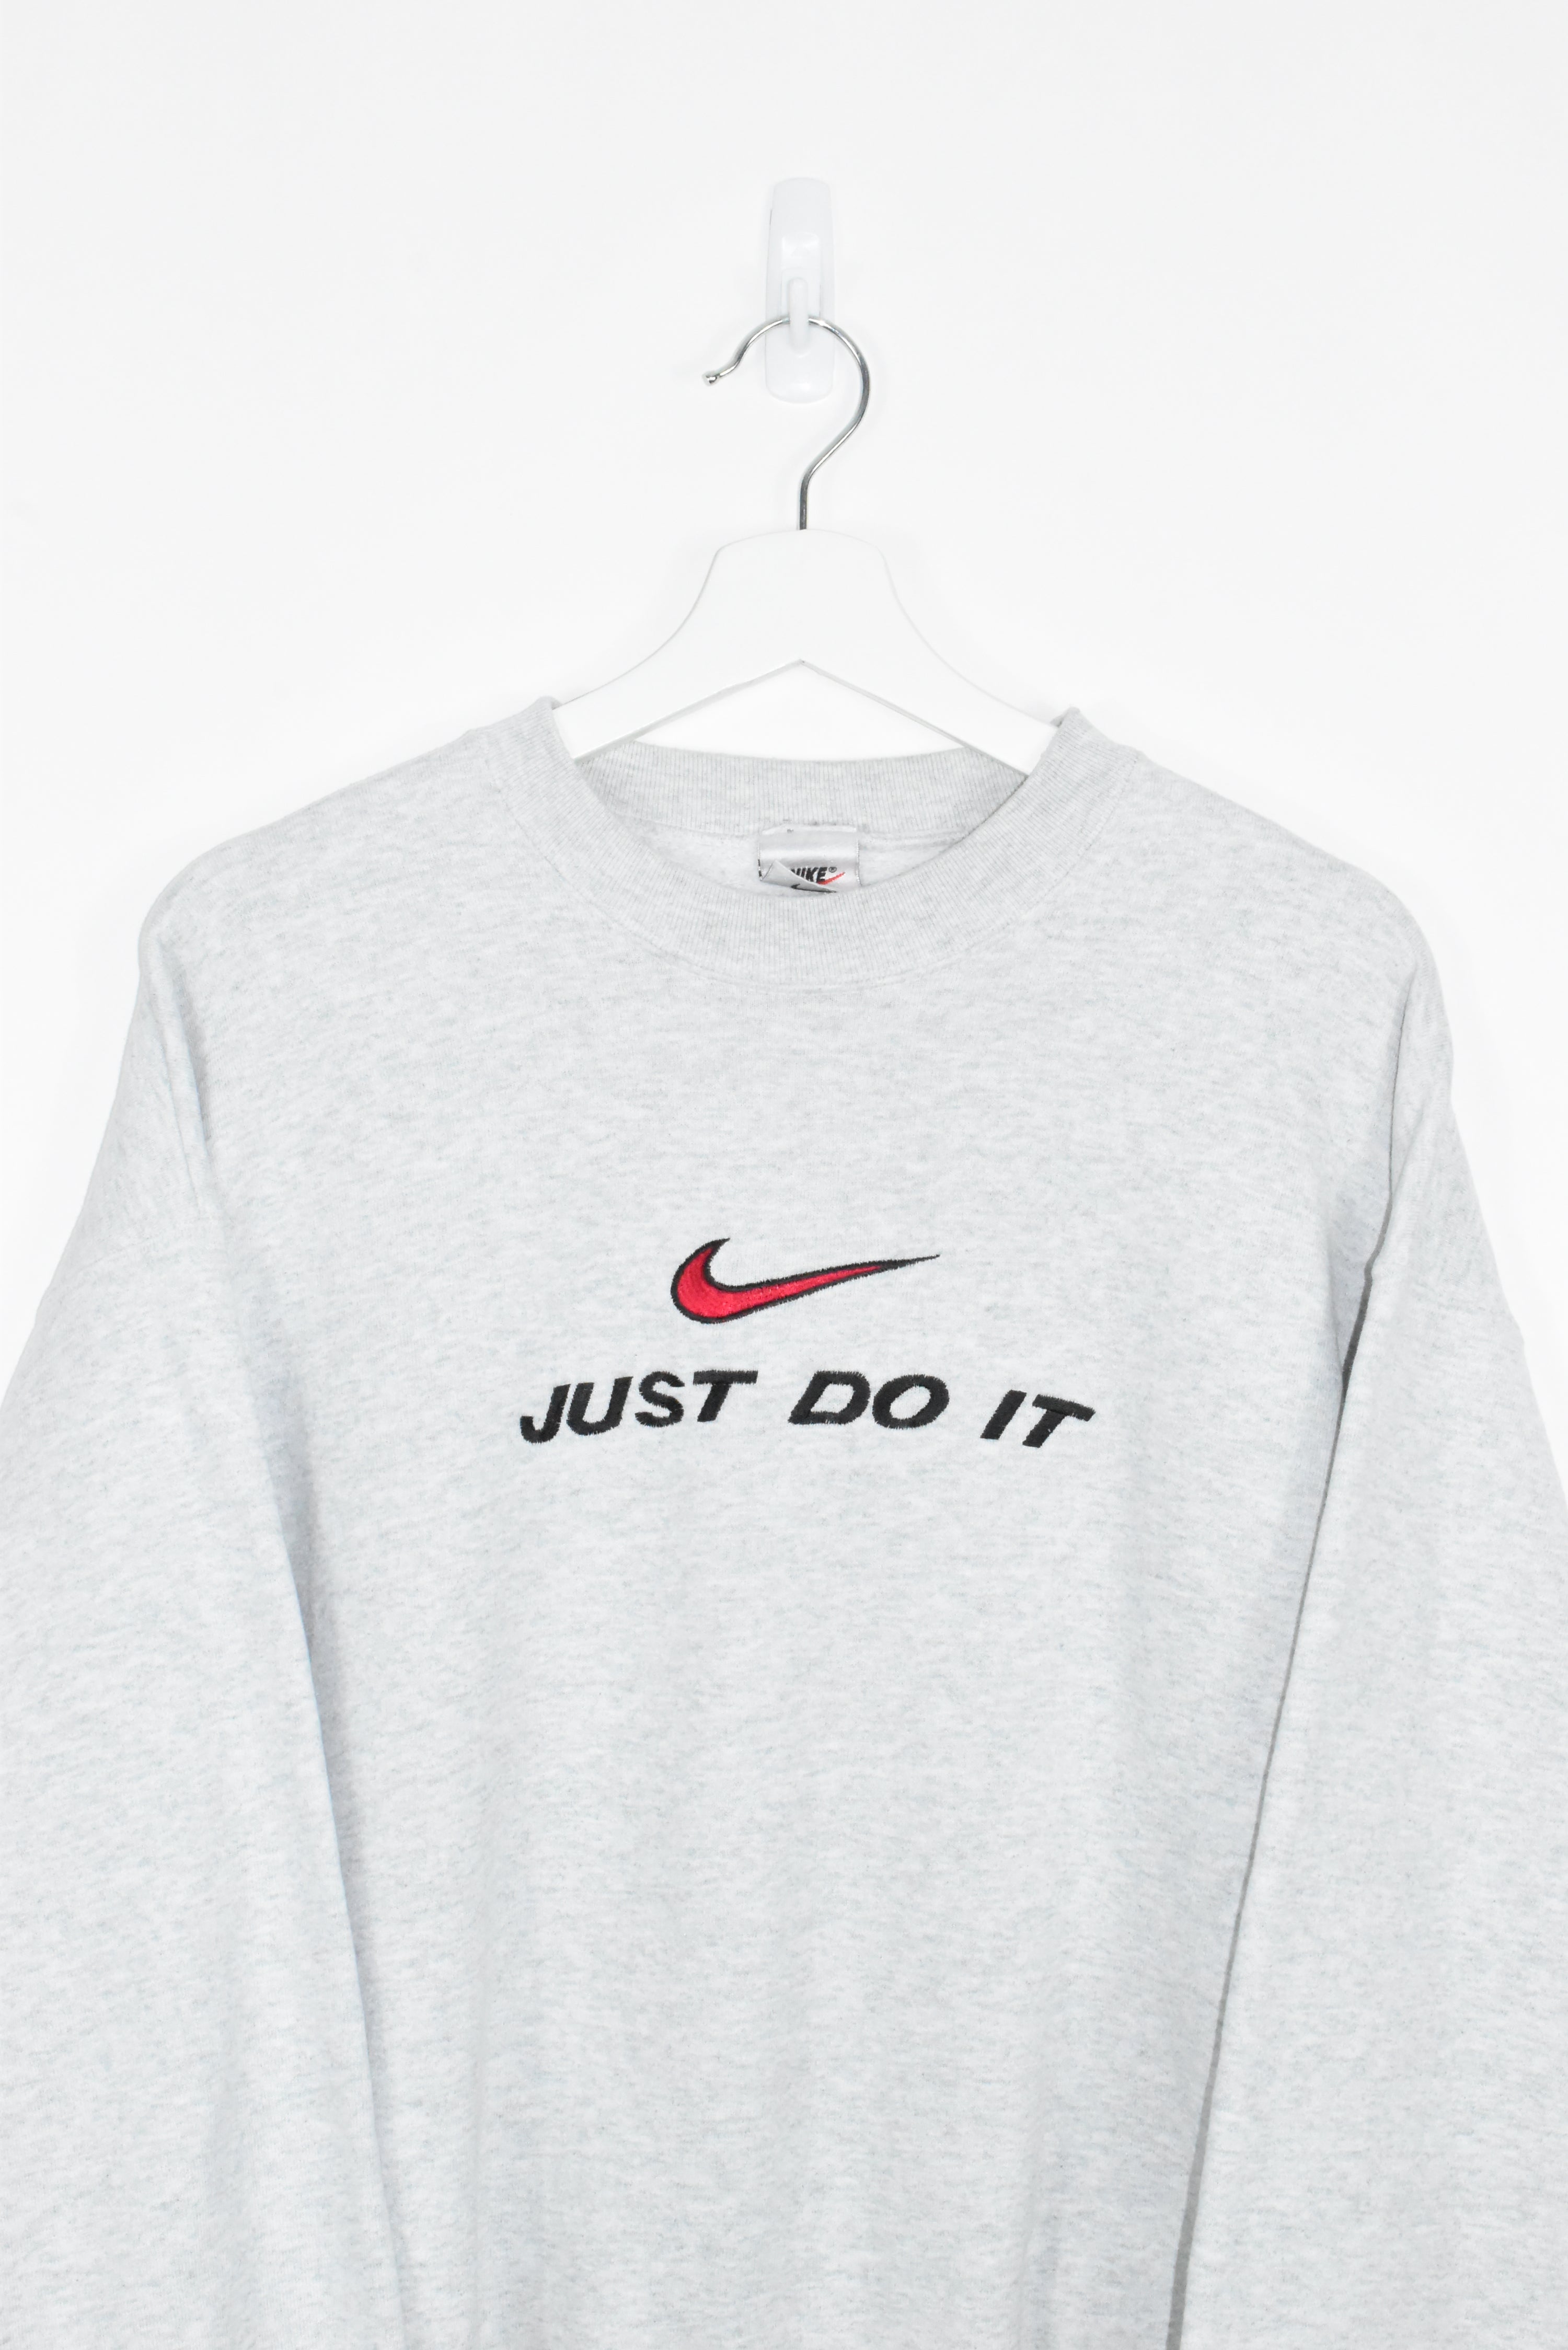 Vintage Nike Embroidered Just Do It Sweatshirt Large (Baggy)